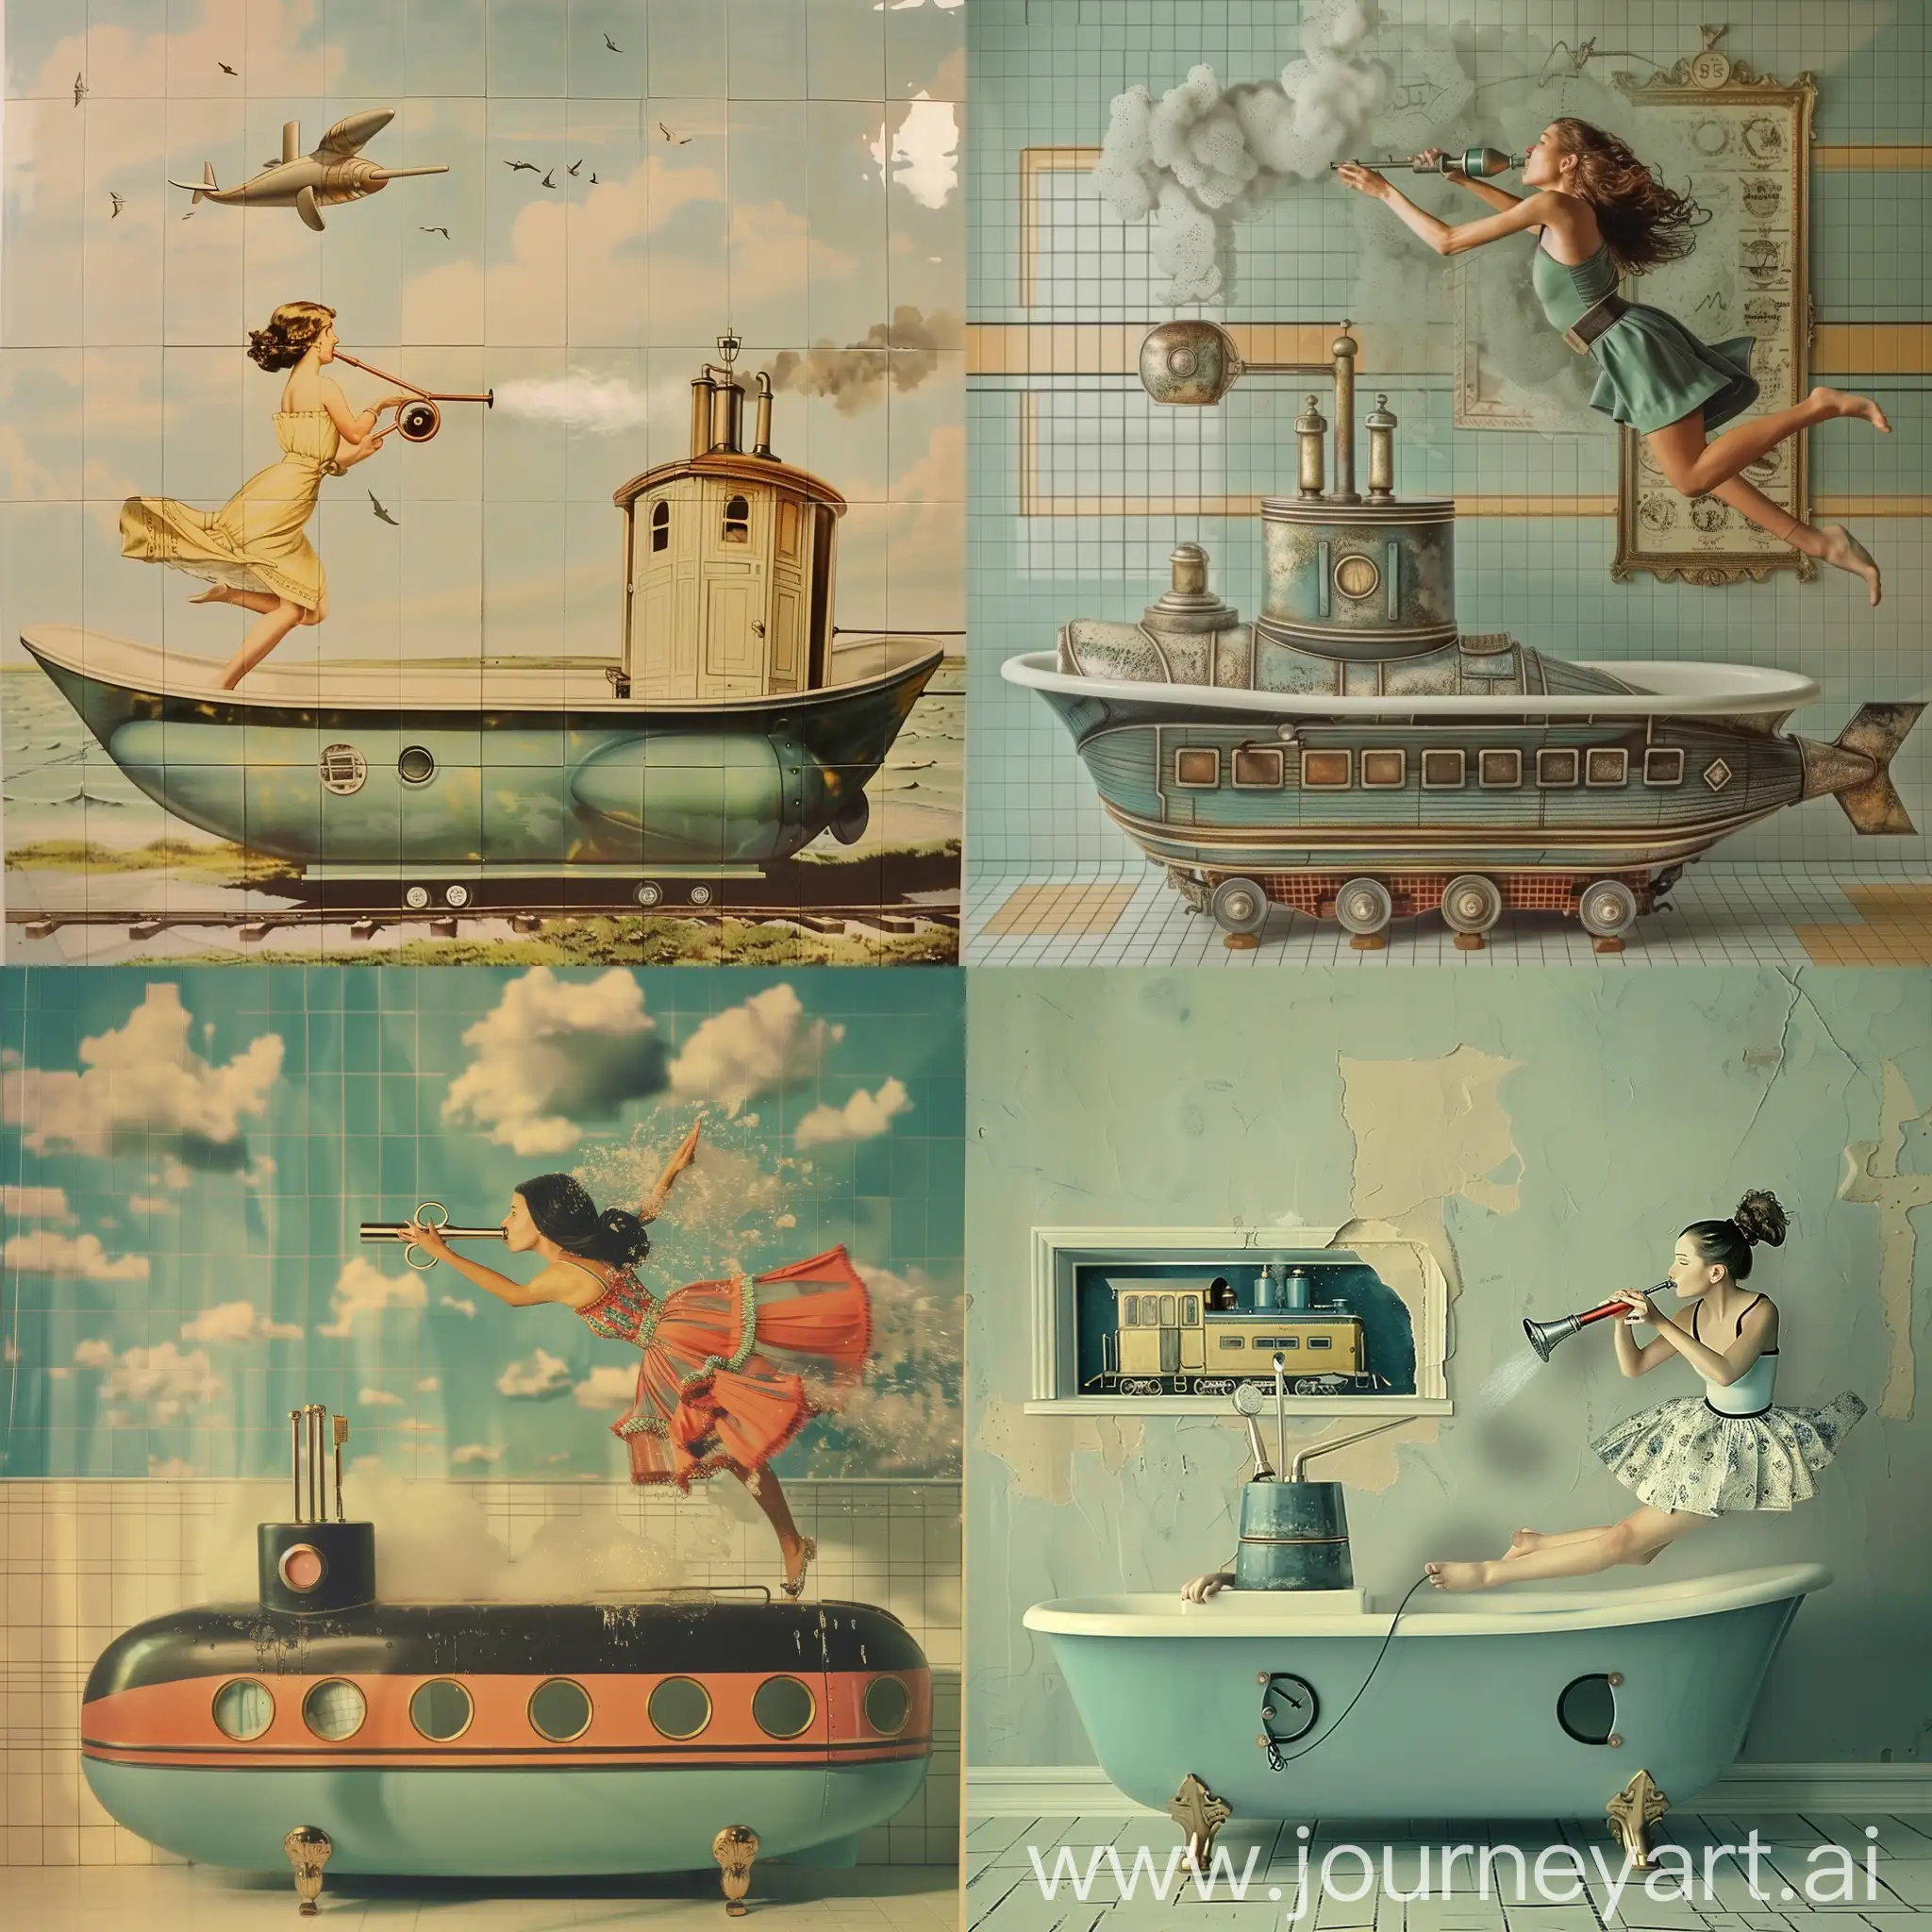 Vintage-Submarine-Bathtub-with-Diver-Lady-Blowing-Train-Whistle